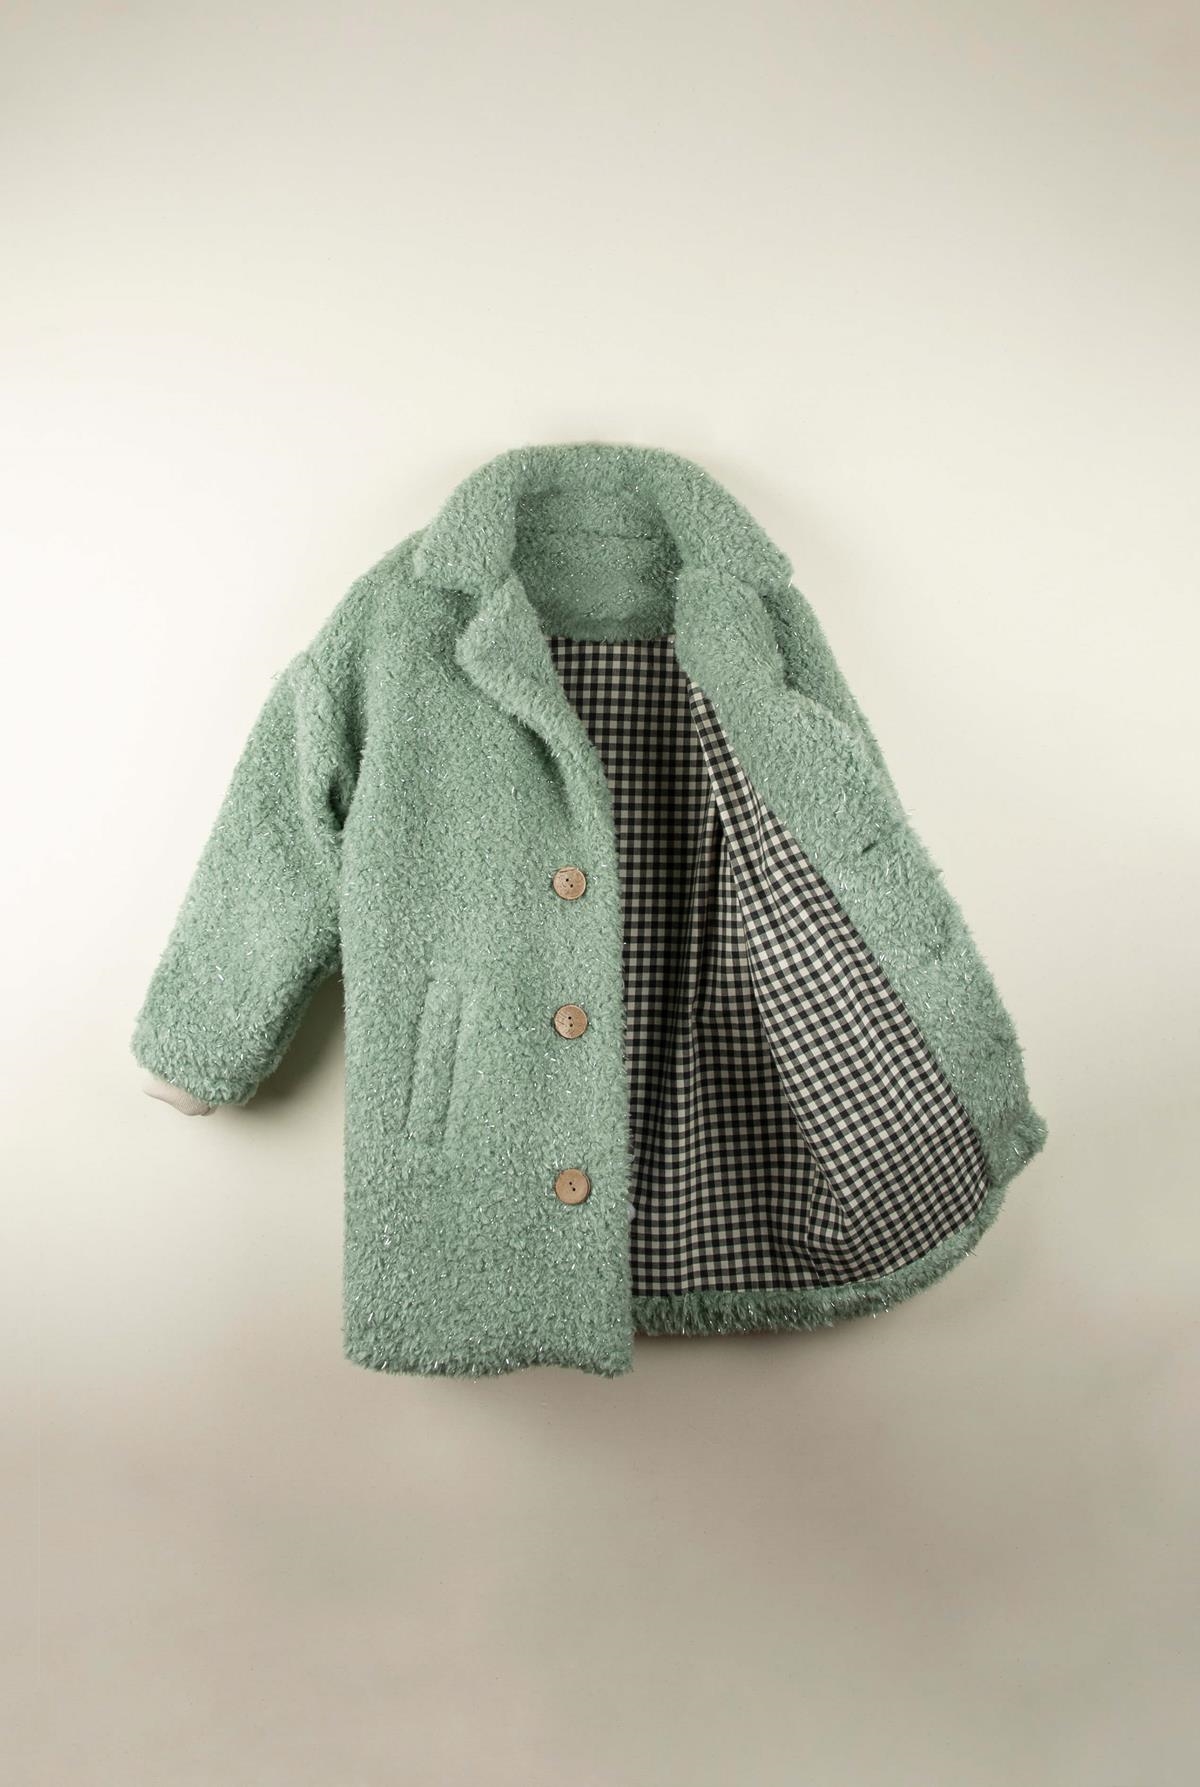 Mod.39.1 Green coat with lapel | AW21.22 Mod.39.1 Green coat with lapel | 1